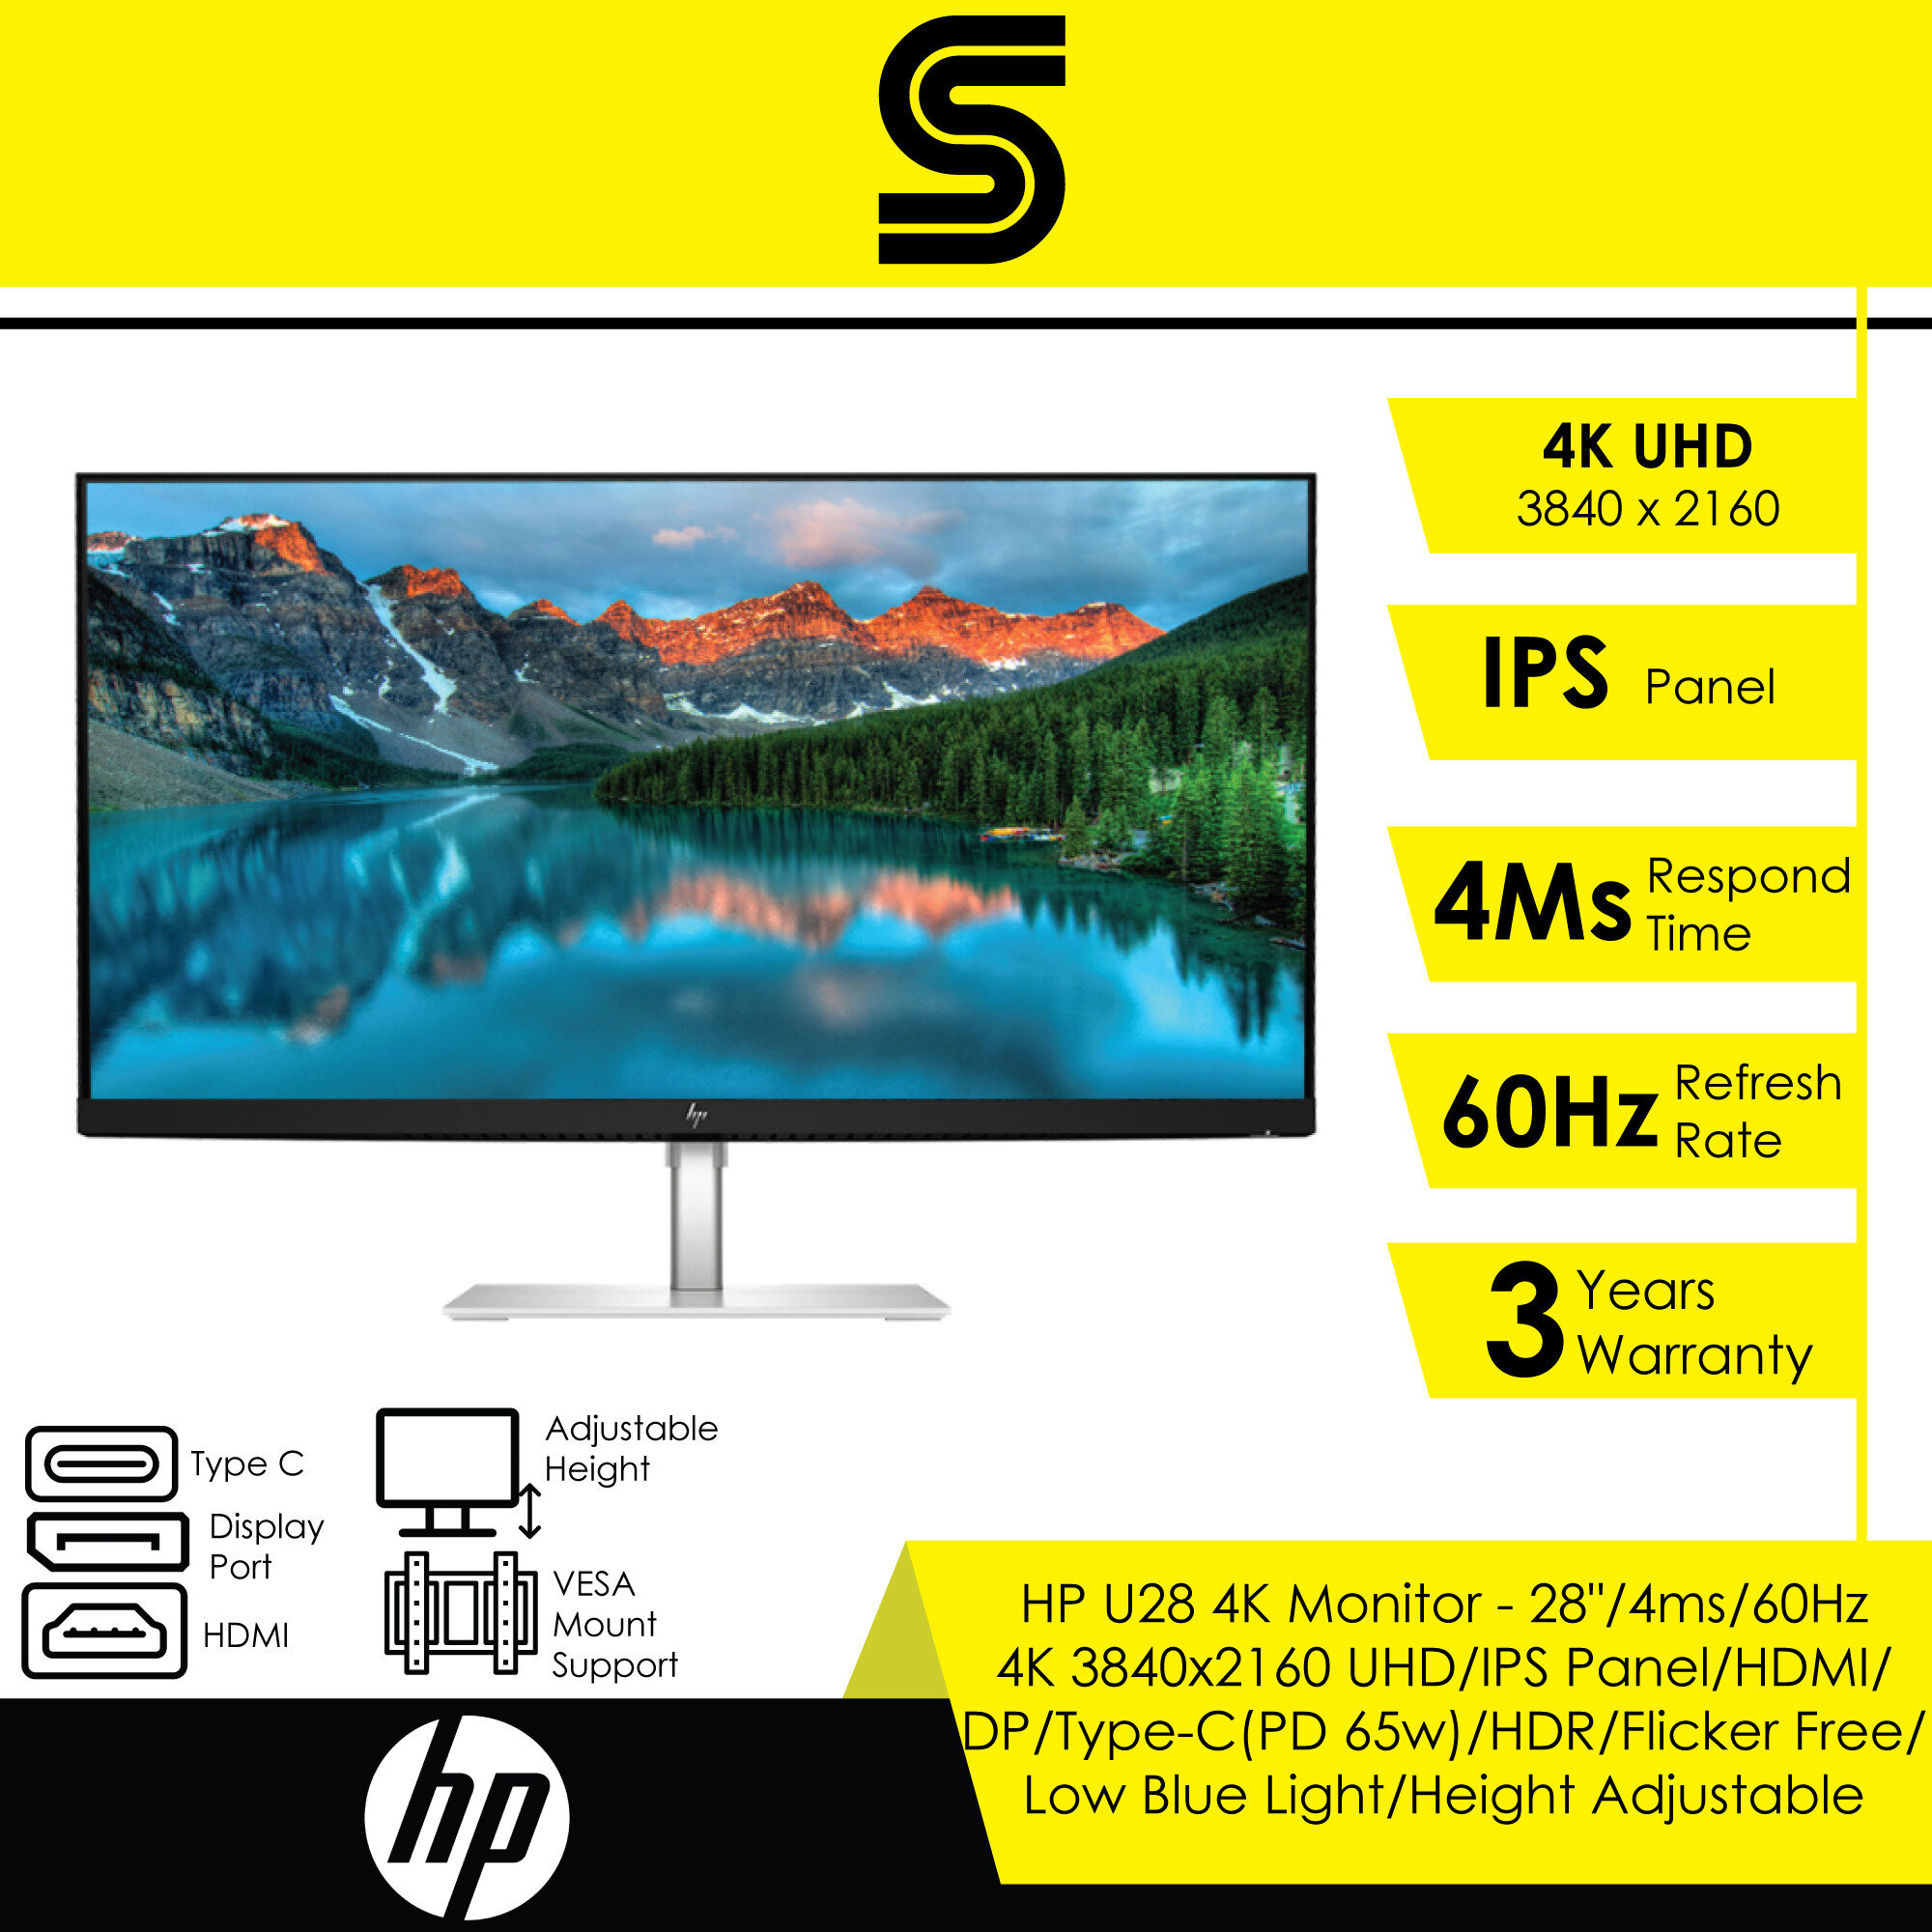 HP U28 4K Monitor - 28"/4ms/60Hz/4K 3840x2160 UHD/IPS Panel/HDMI/DP/Type-C(PD 65w)/HDR/Flicker Free/Low Blue Light/Height Adjustable